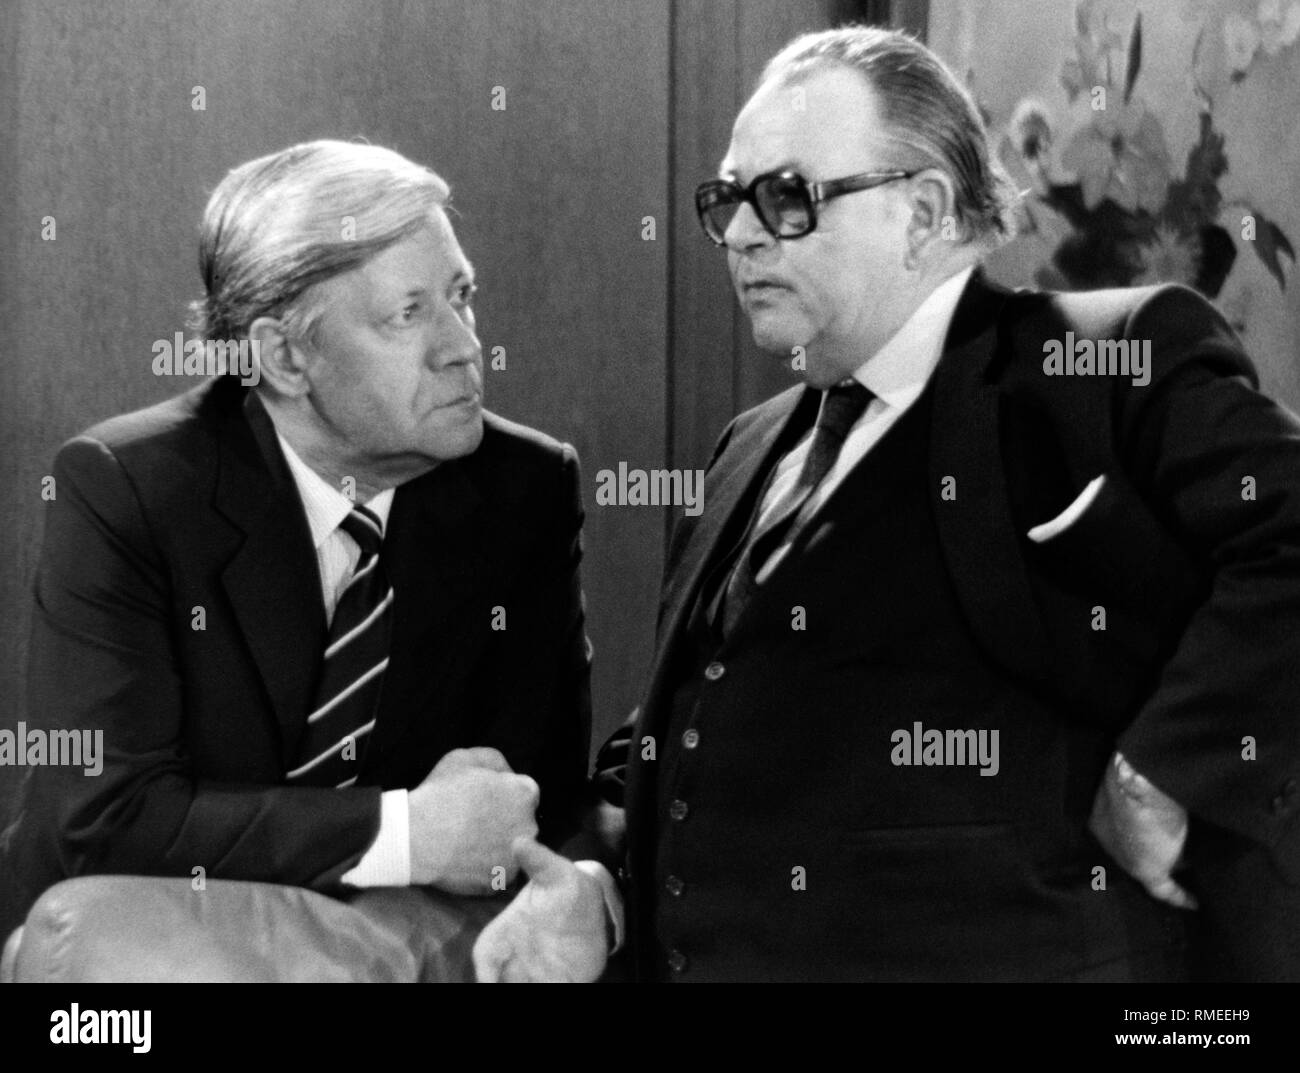 Federal Chancellor Helmut Schmidt talks with his Minister of State Hans-Juergen Wischnewski at the Federal Chancellery. Stock Photo